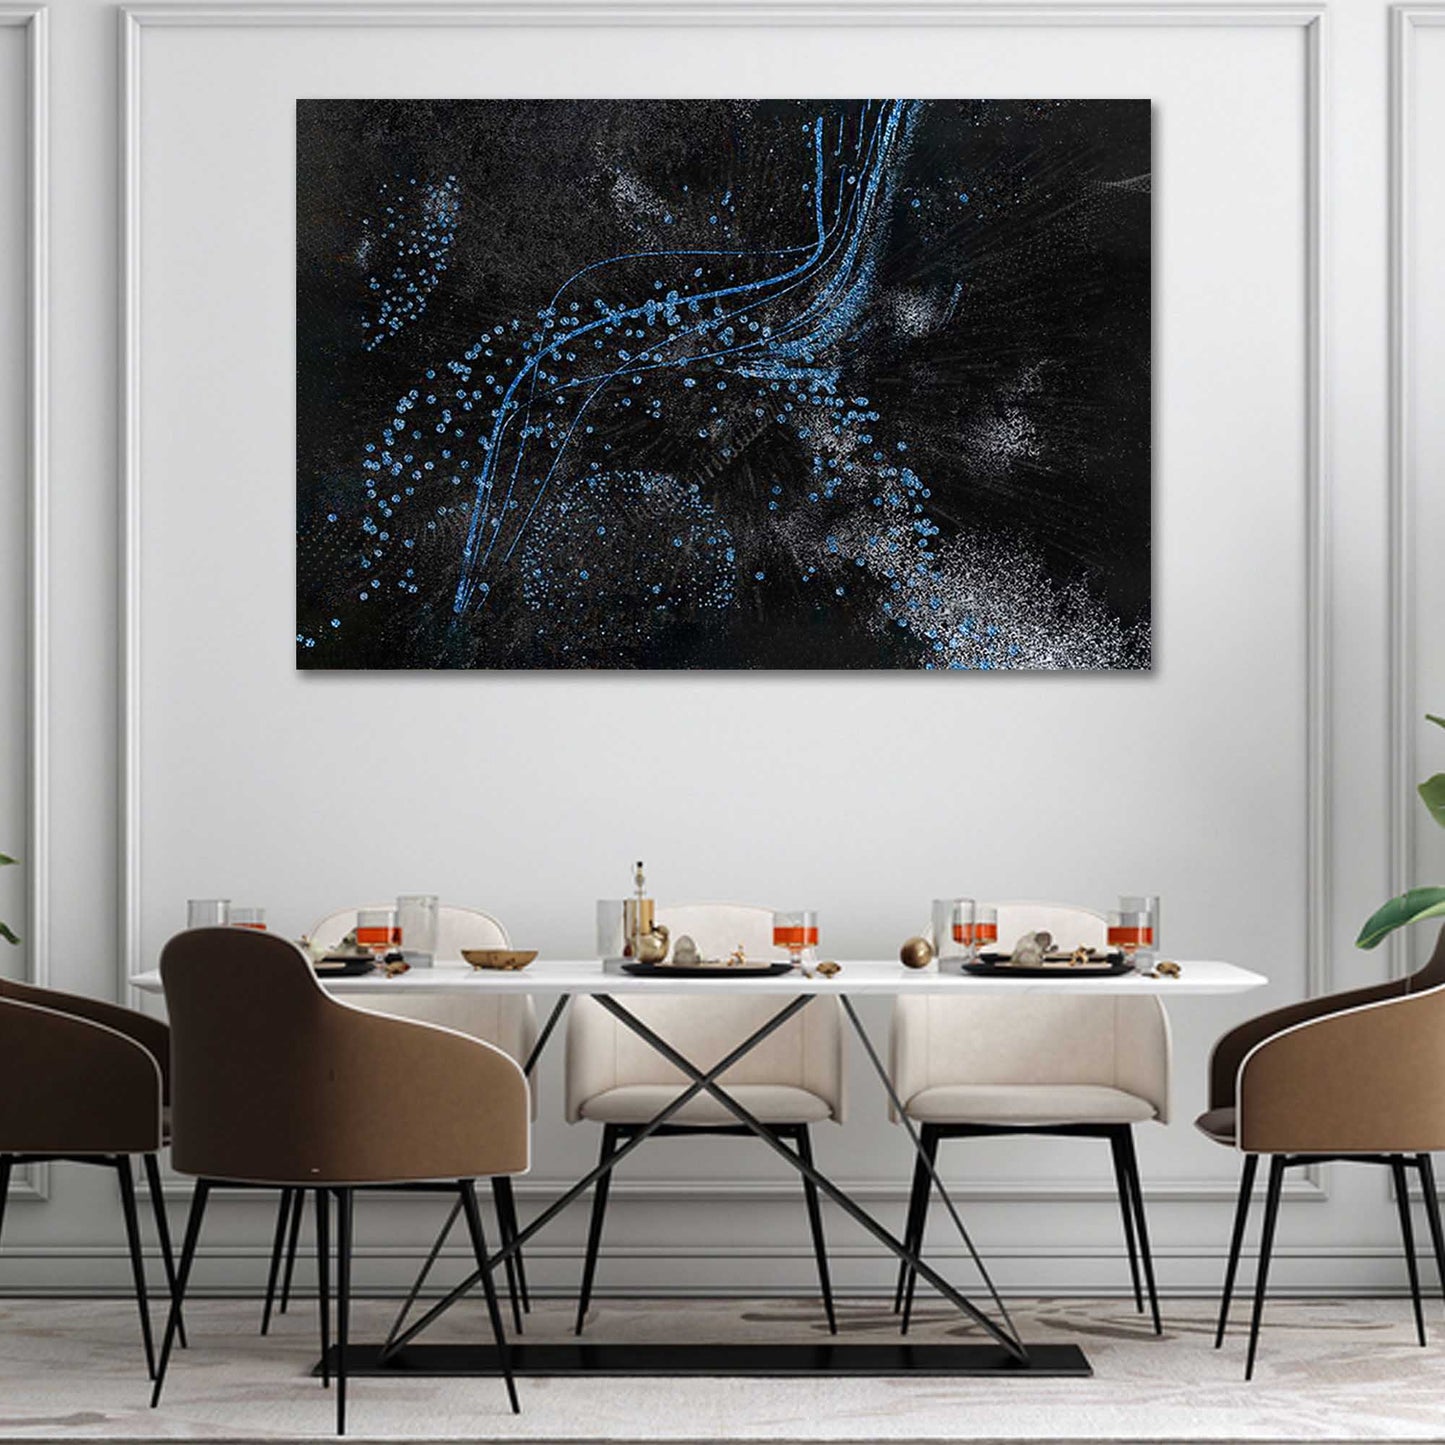 Black Dandelion Canvas Wall Art - Image by Tailored Canvases